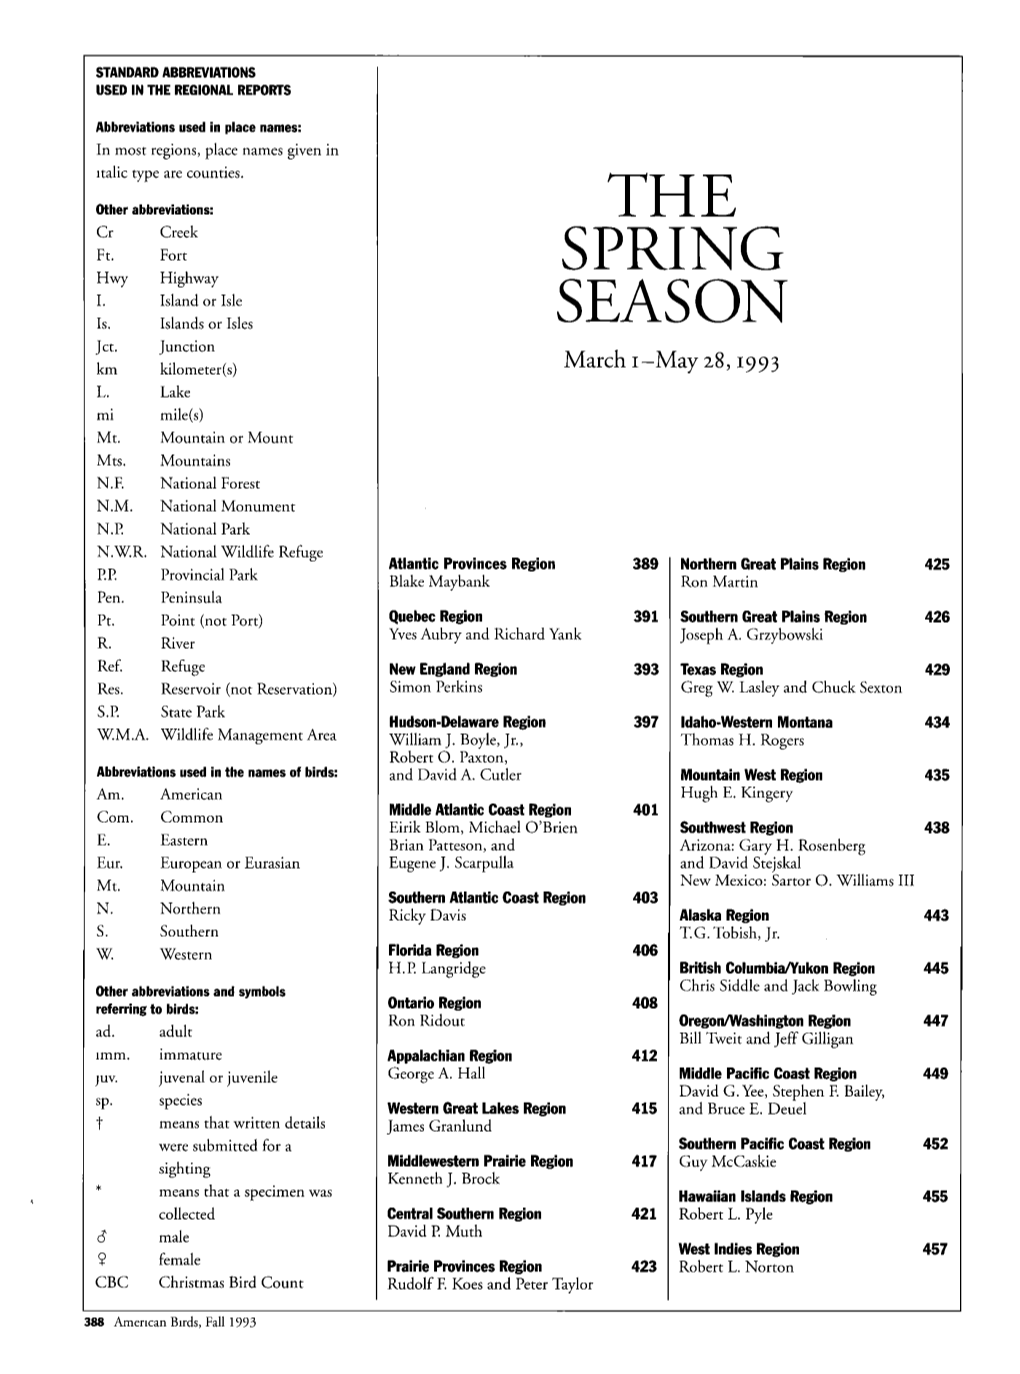 The Spring Season March 1-May 28, 1993